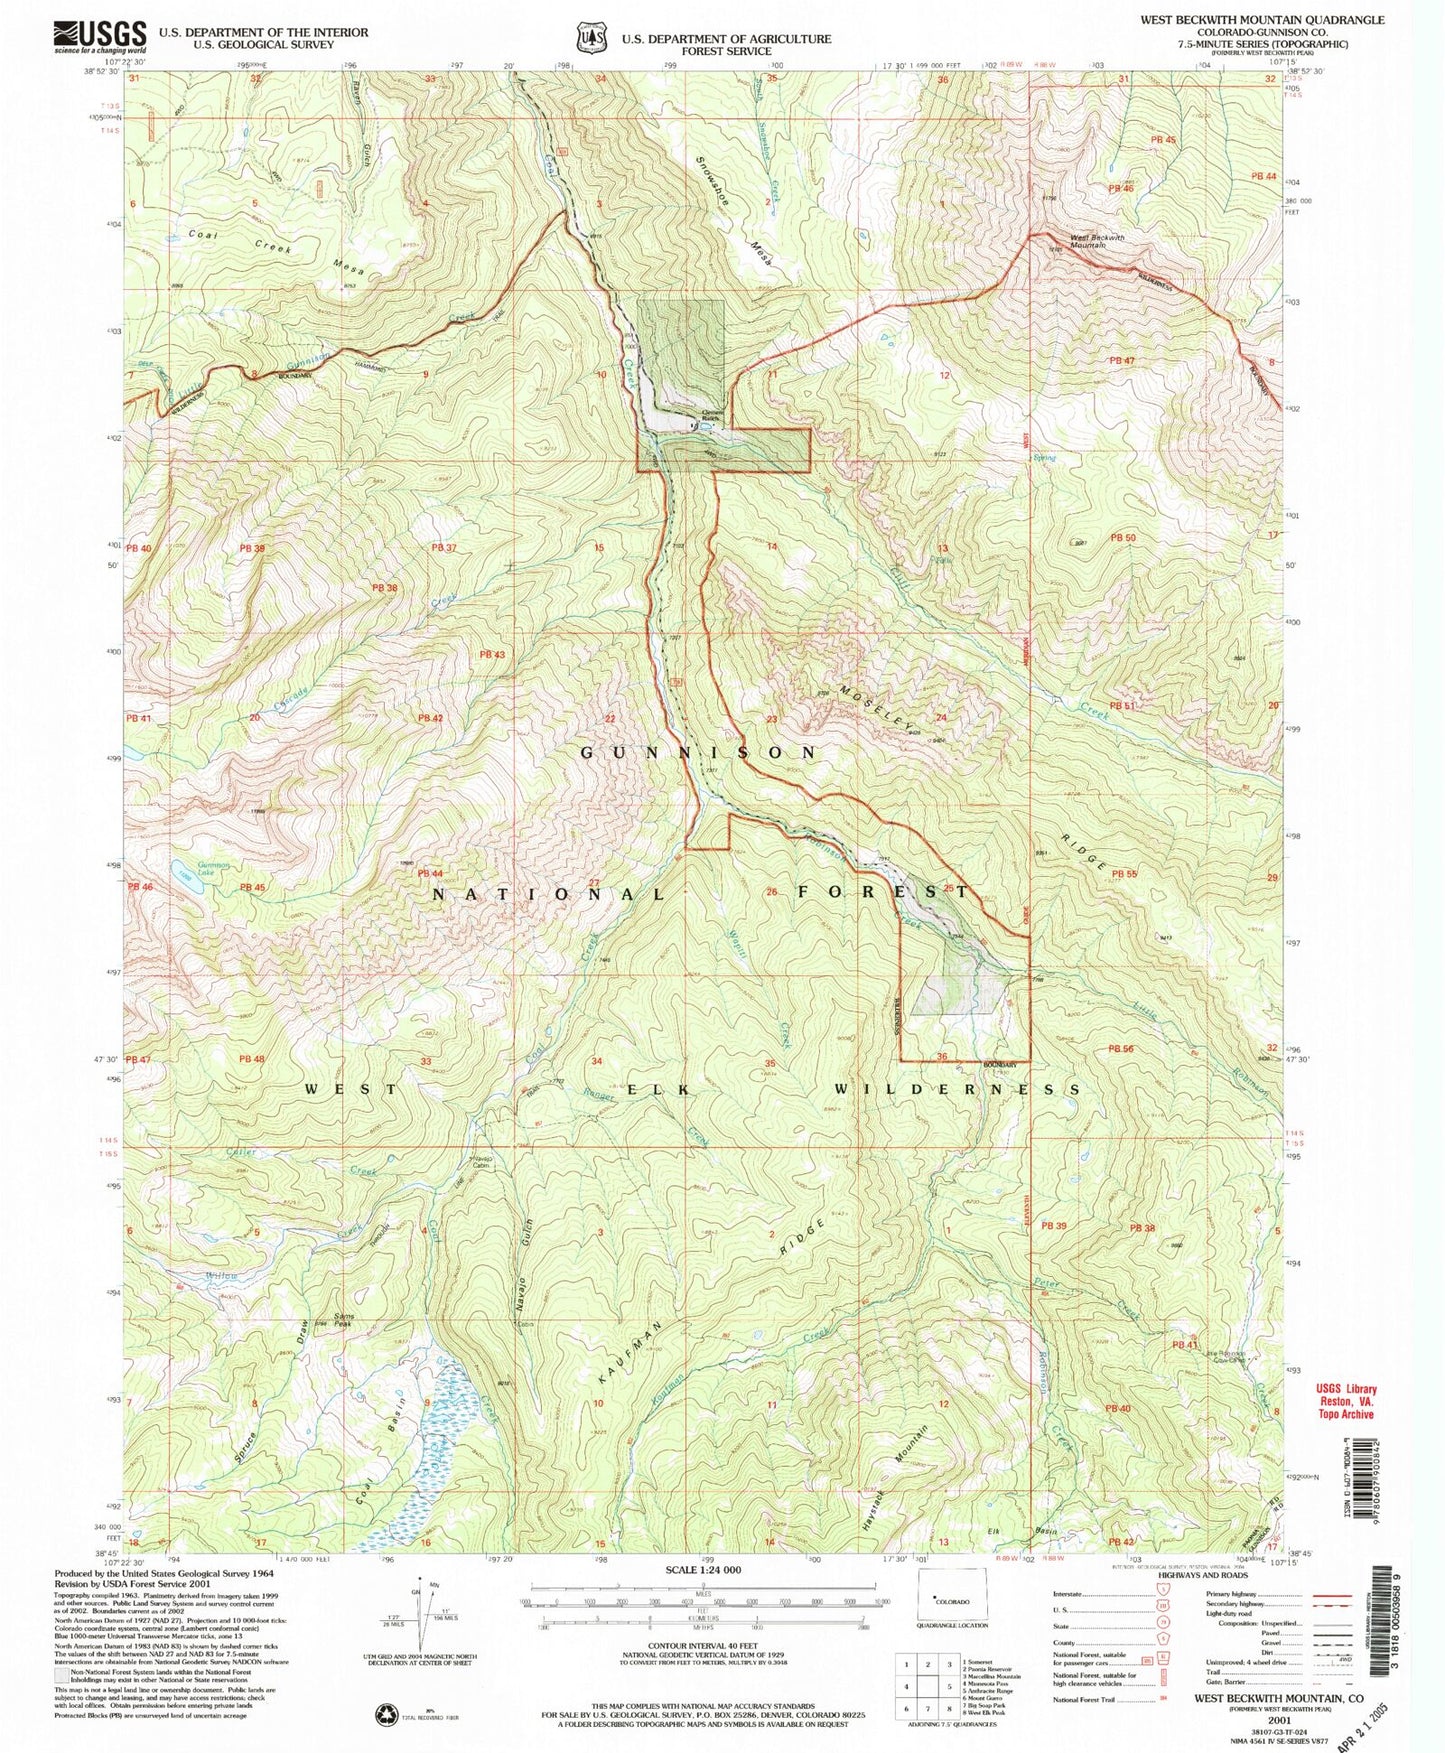 USGS Classic West Beckwith Mountain Colorado 7.5'x7.5' Topo Map Image